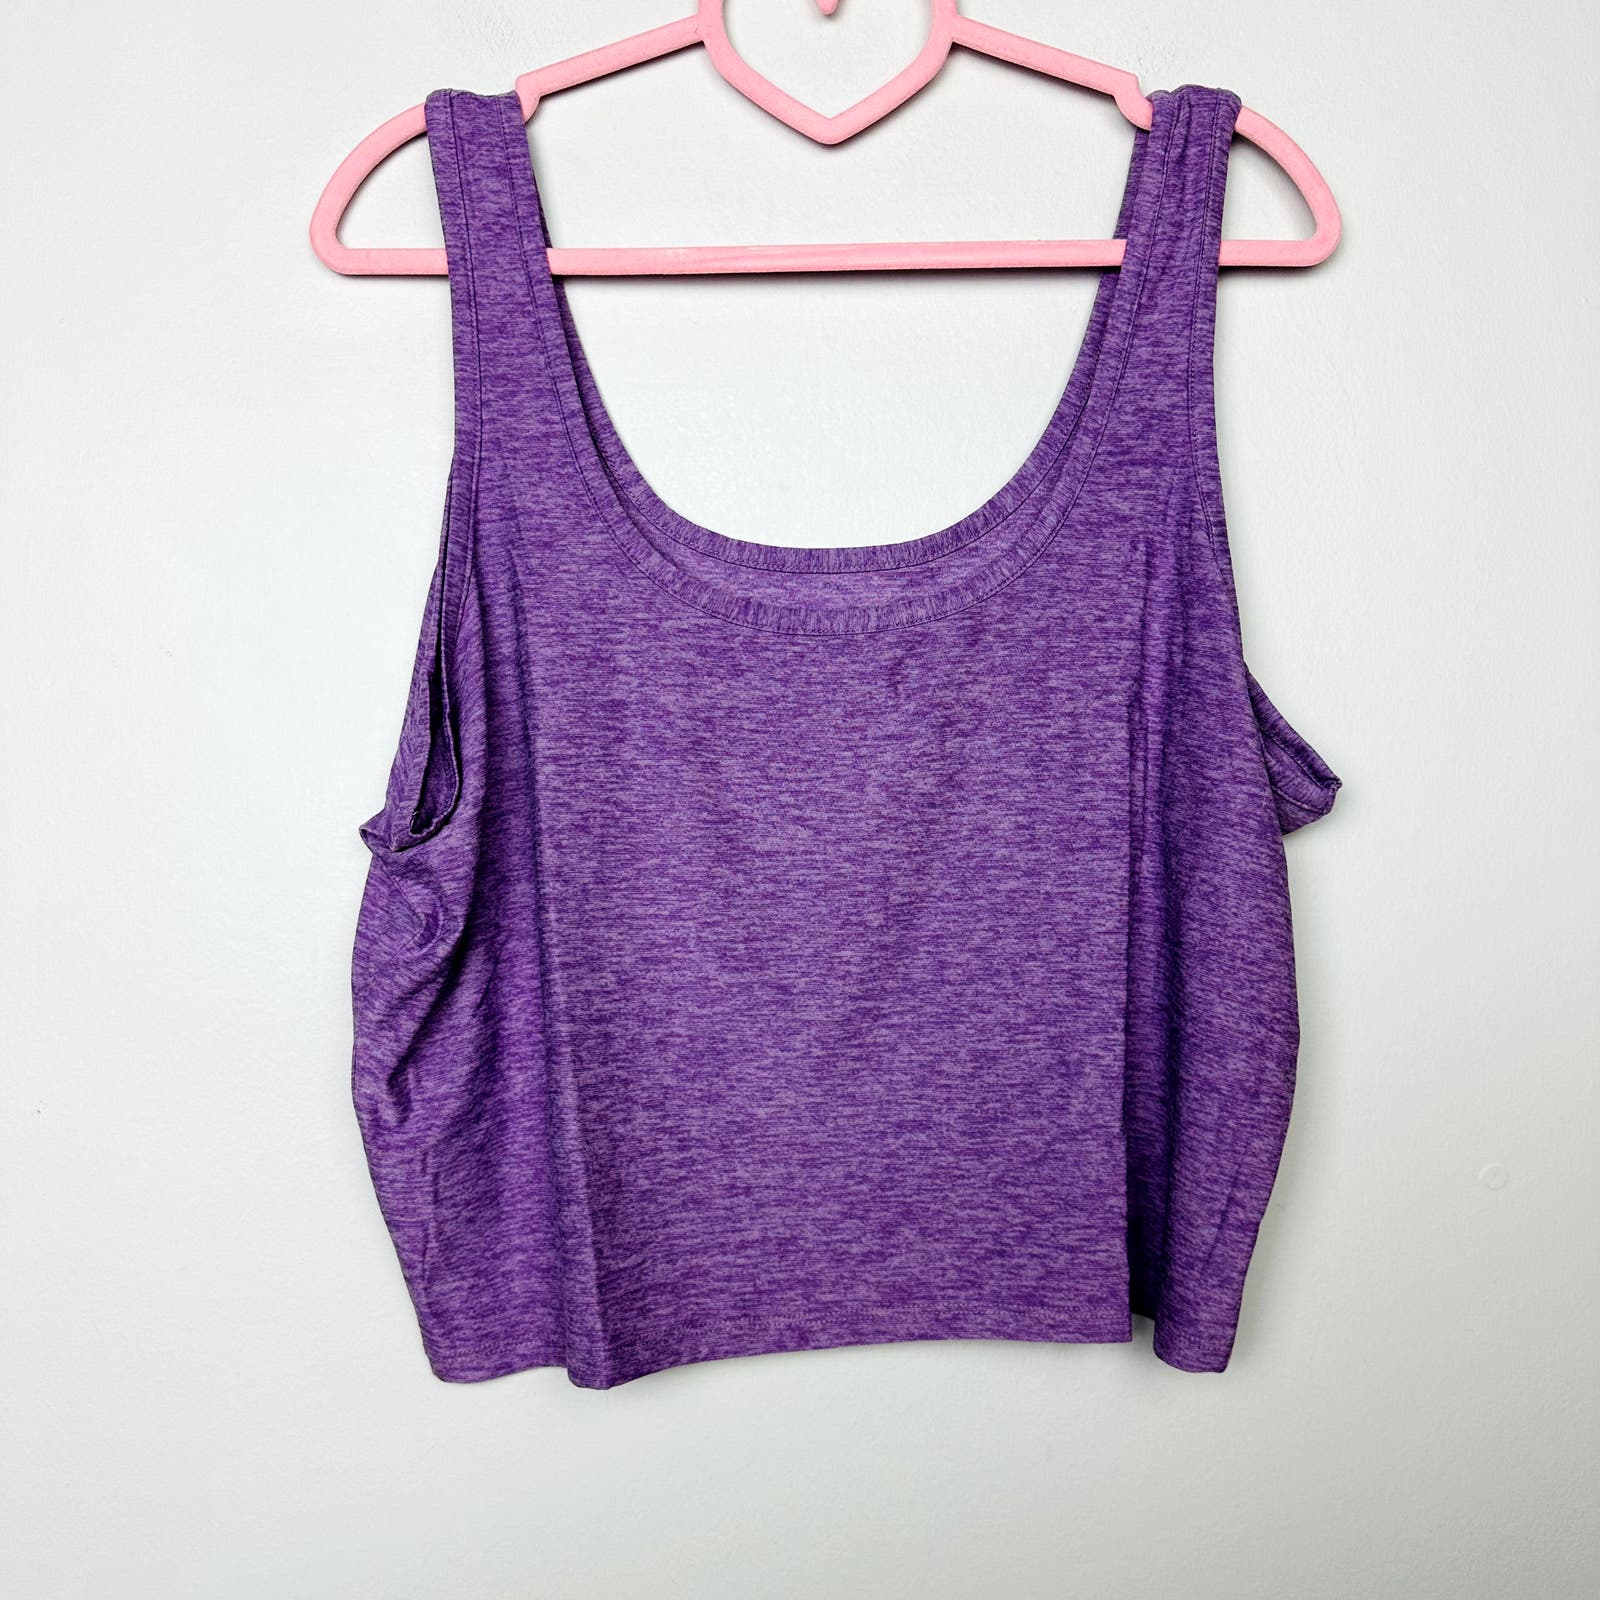 Outdoor Voices NWT All Day Crop Tank Top CloudKnit Purple Size XXXL